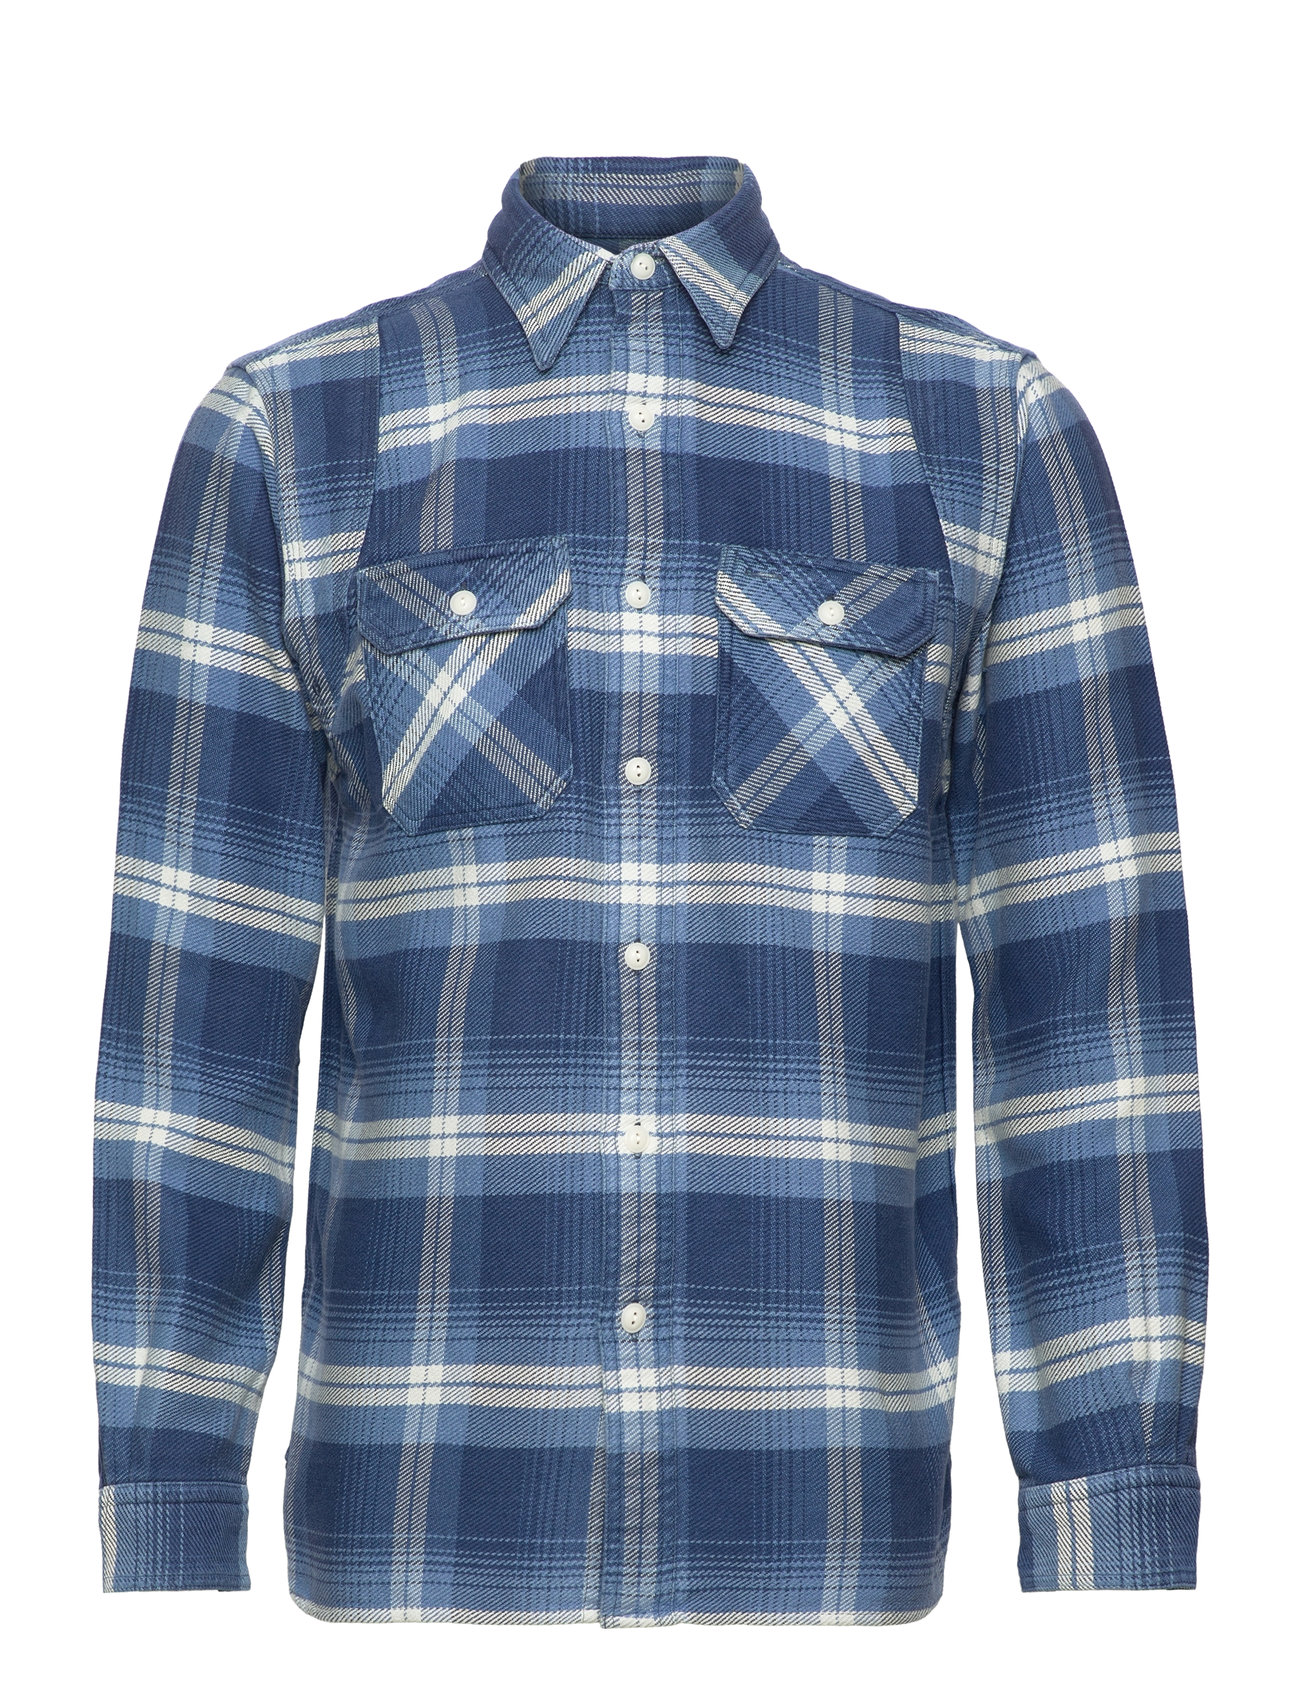 Classic Fit Plaid Flannel Workshirt Tops Shirts Casual Blue Polo Ralph Lauren